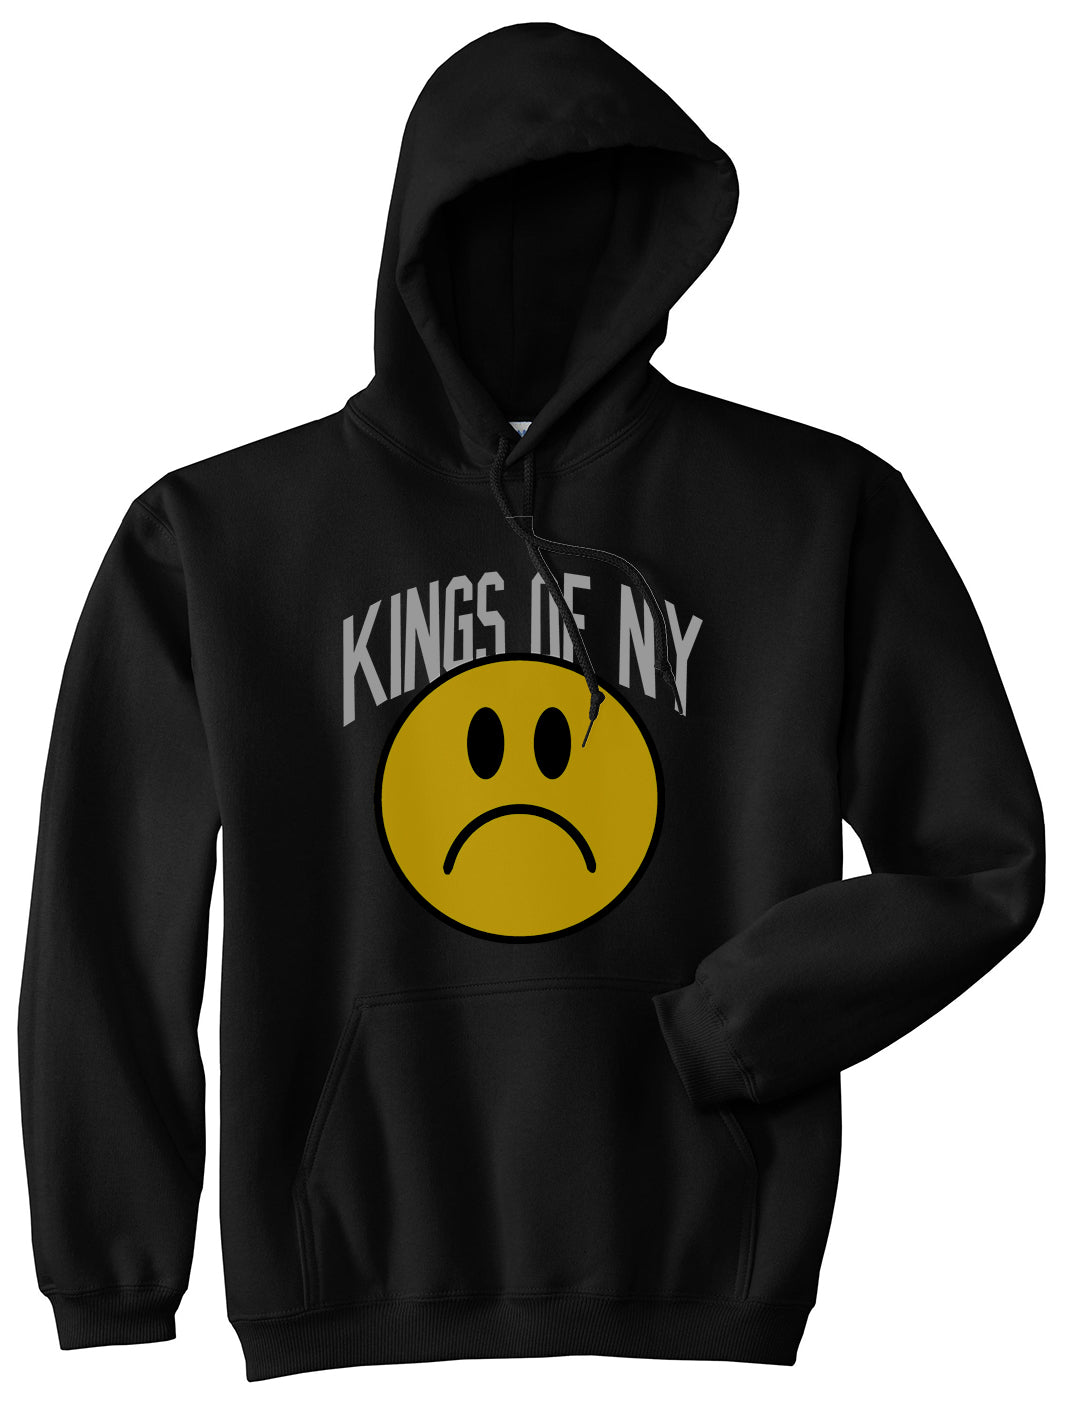 Im Upset Sad Face Mens Pullover Hoodie Black by Kings Of NY